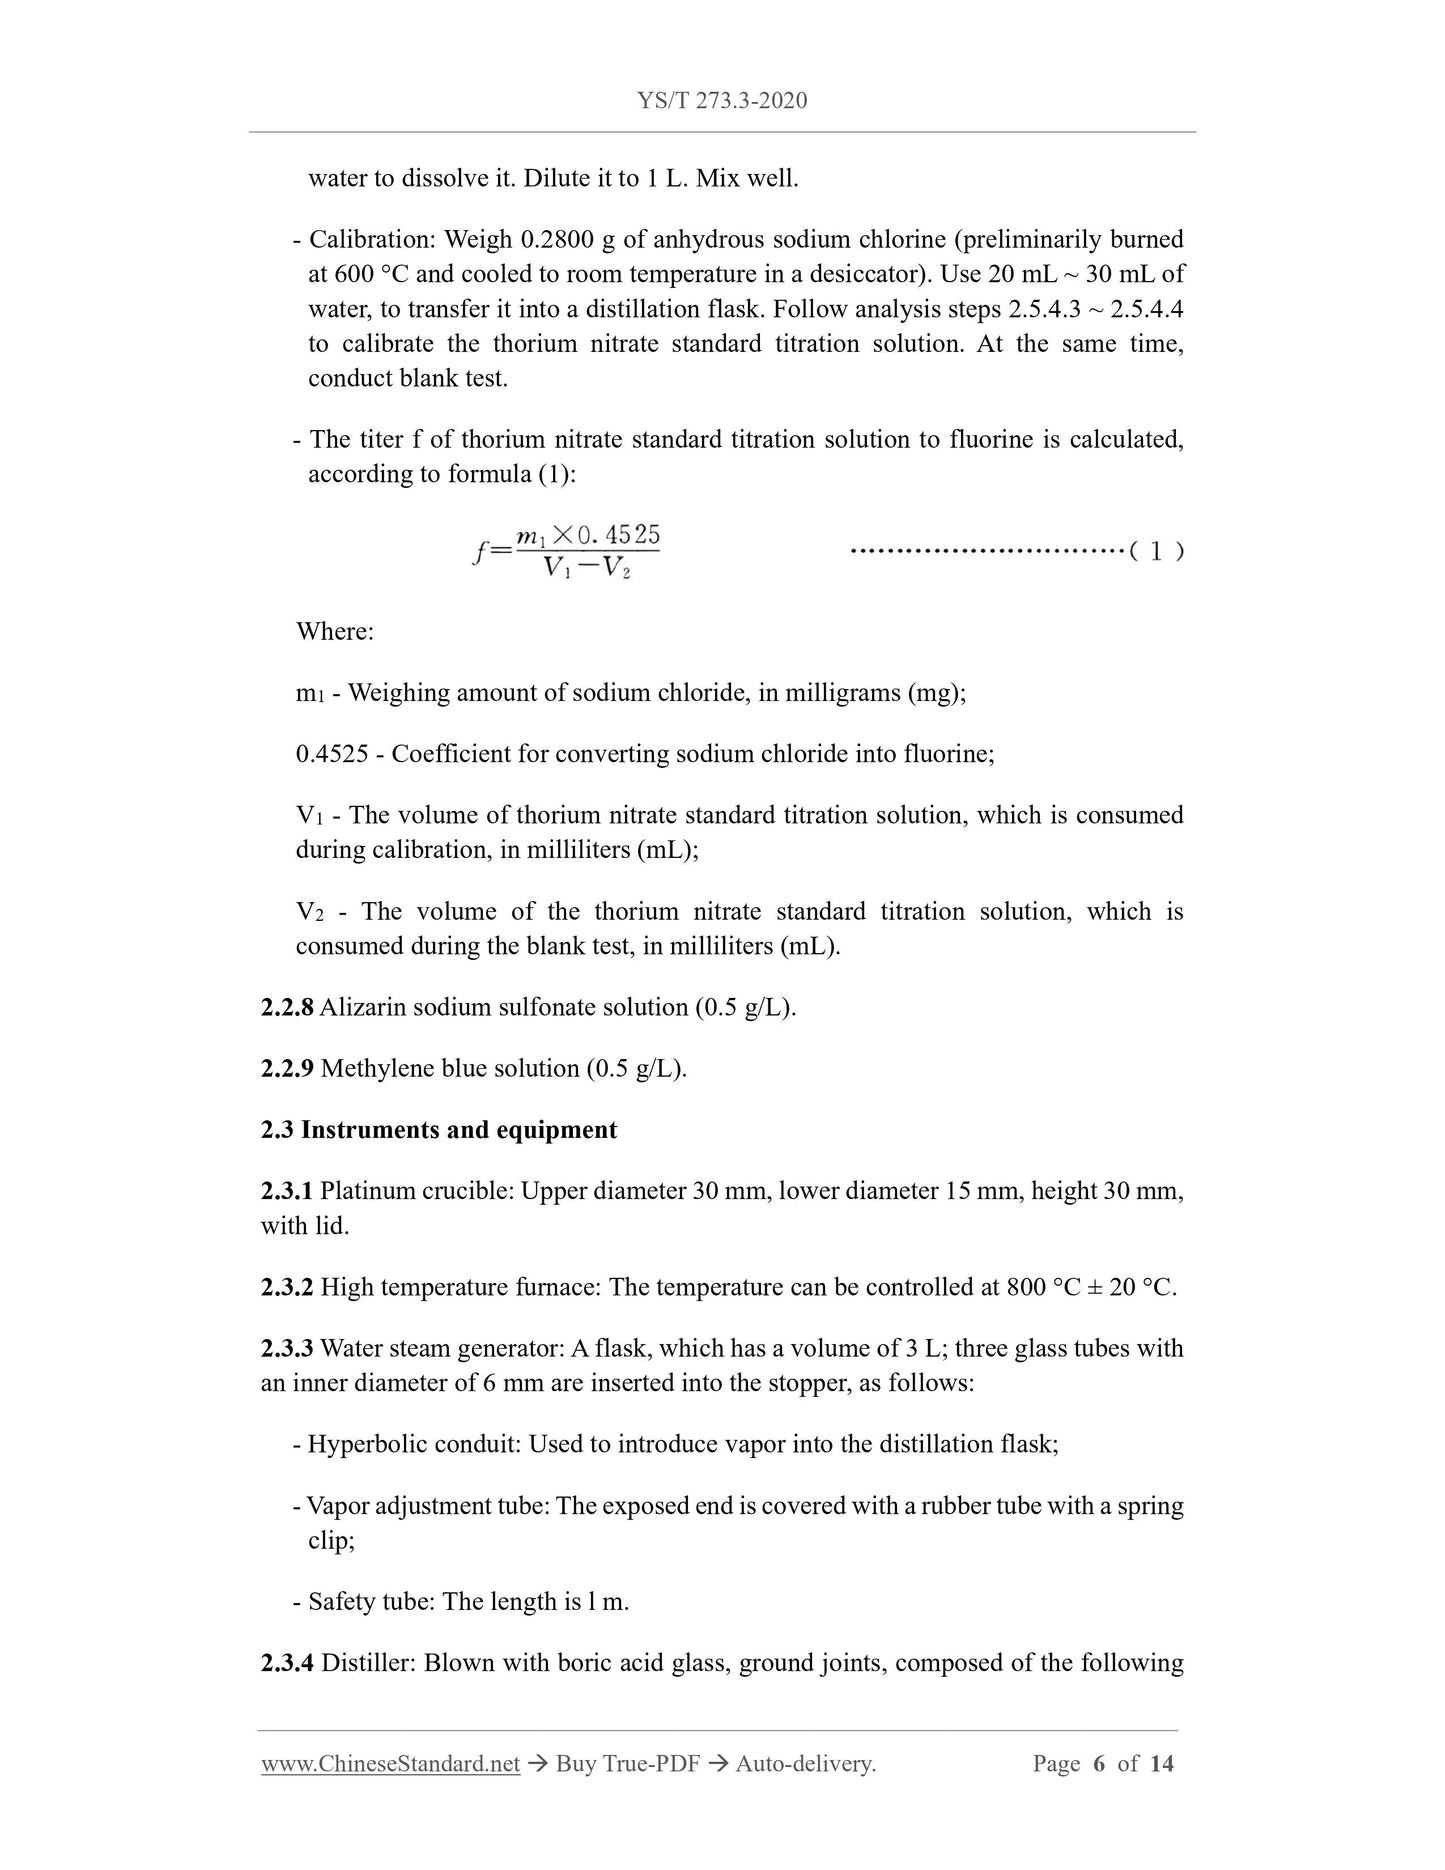 YS/T 273.3-2020 Page 4